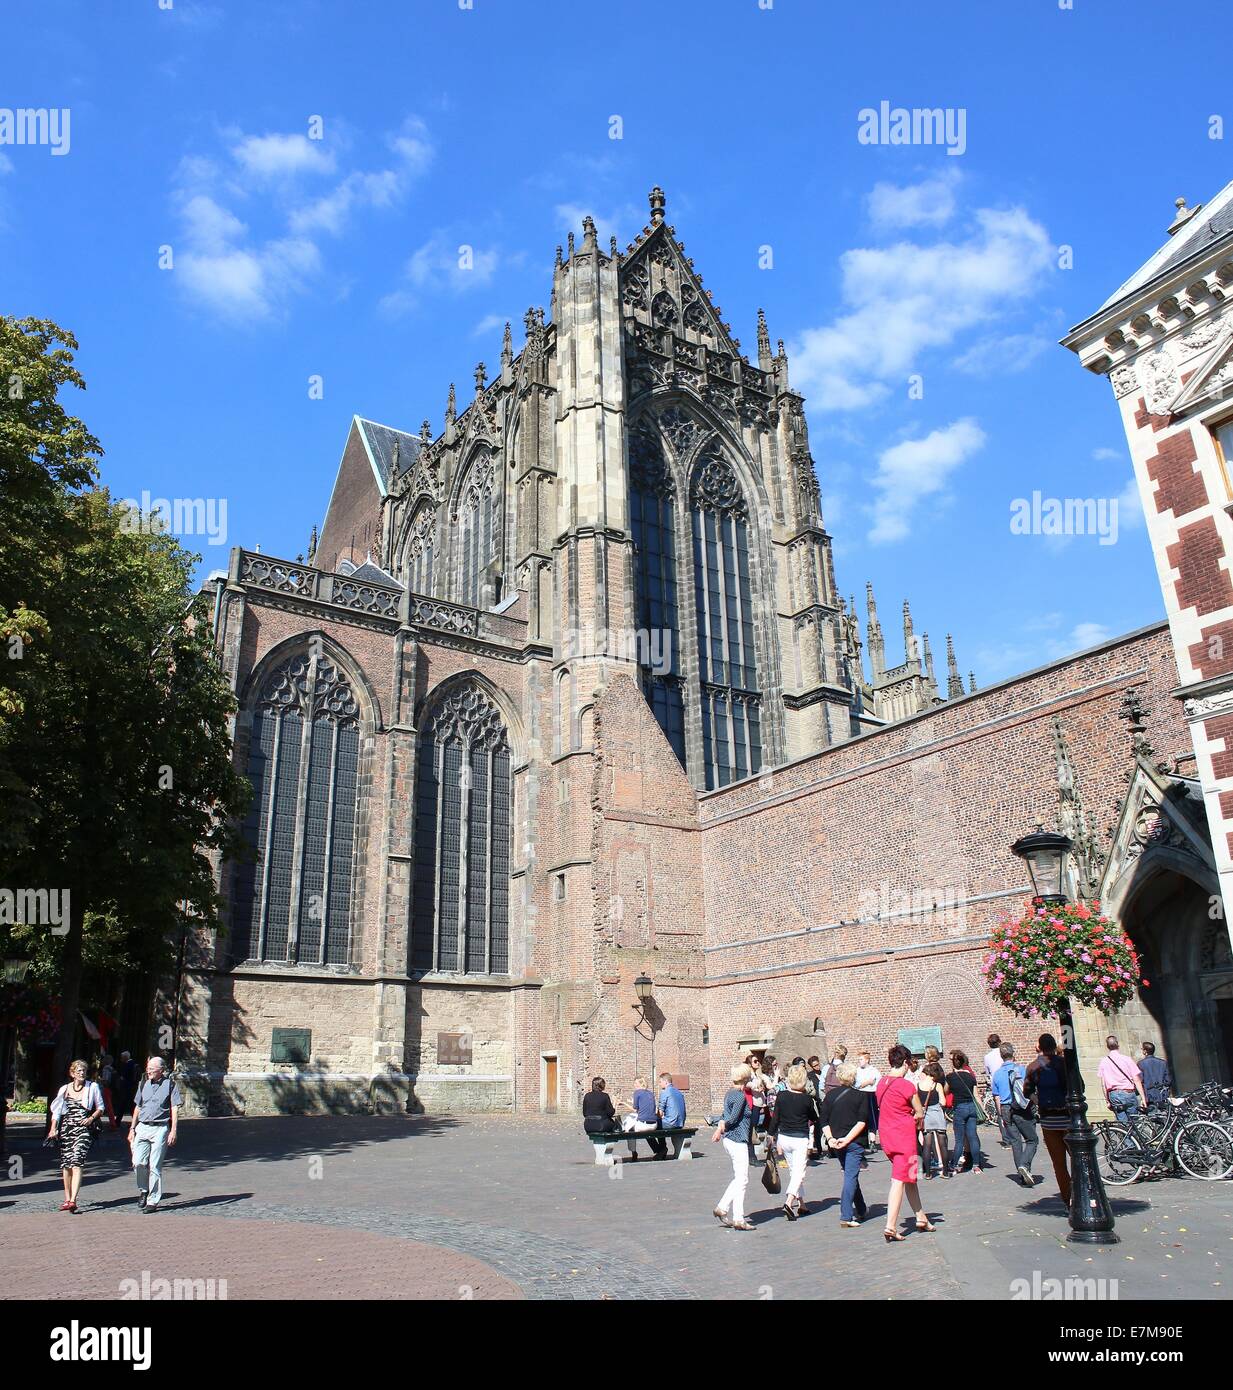 Exterior of the gothic Dom church or St. Martin's Cathedral in Utrecht, The Netherlands. Group of tourists visiting Dom Square Stock Photo